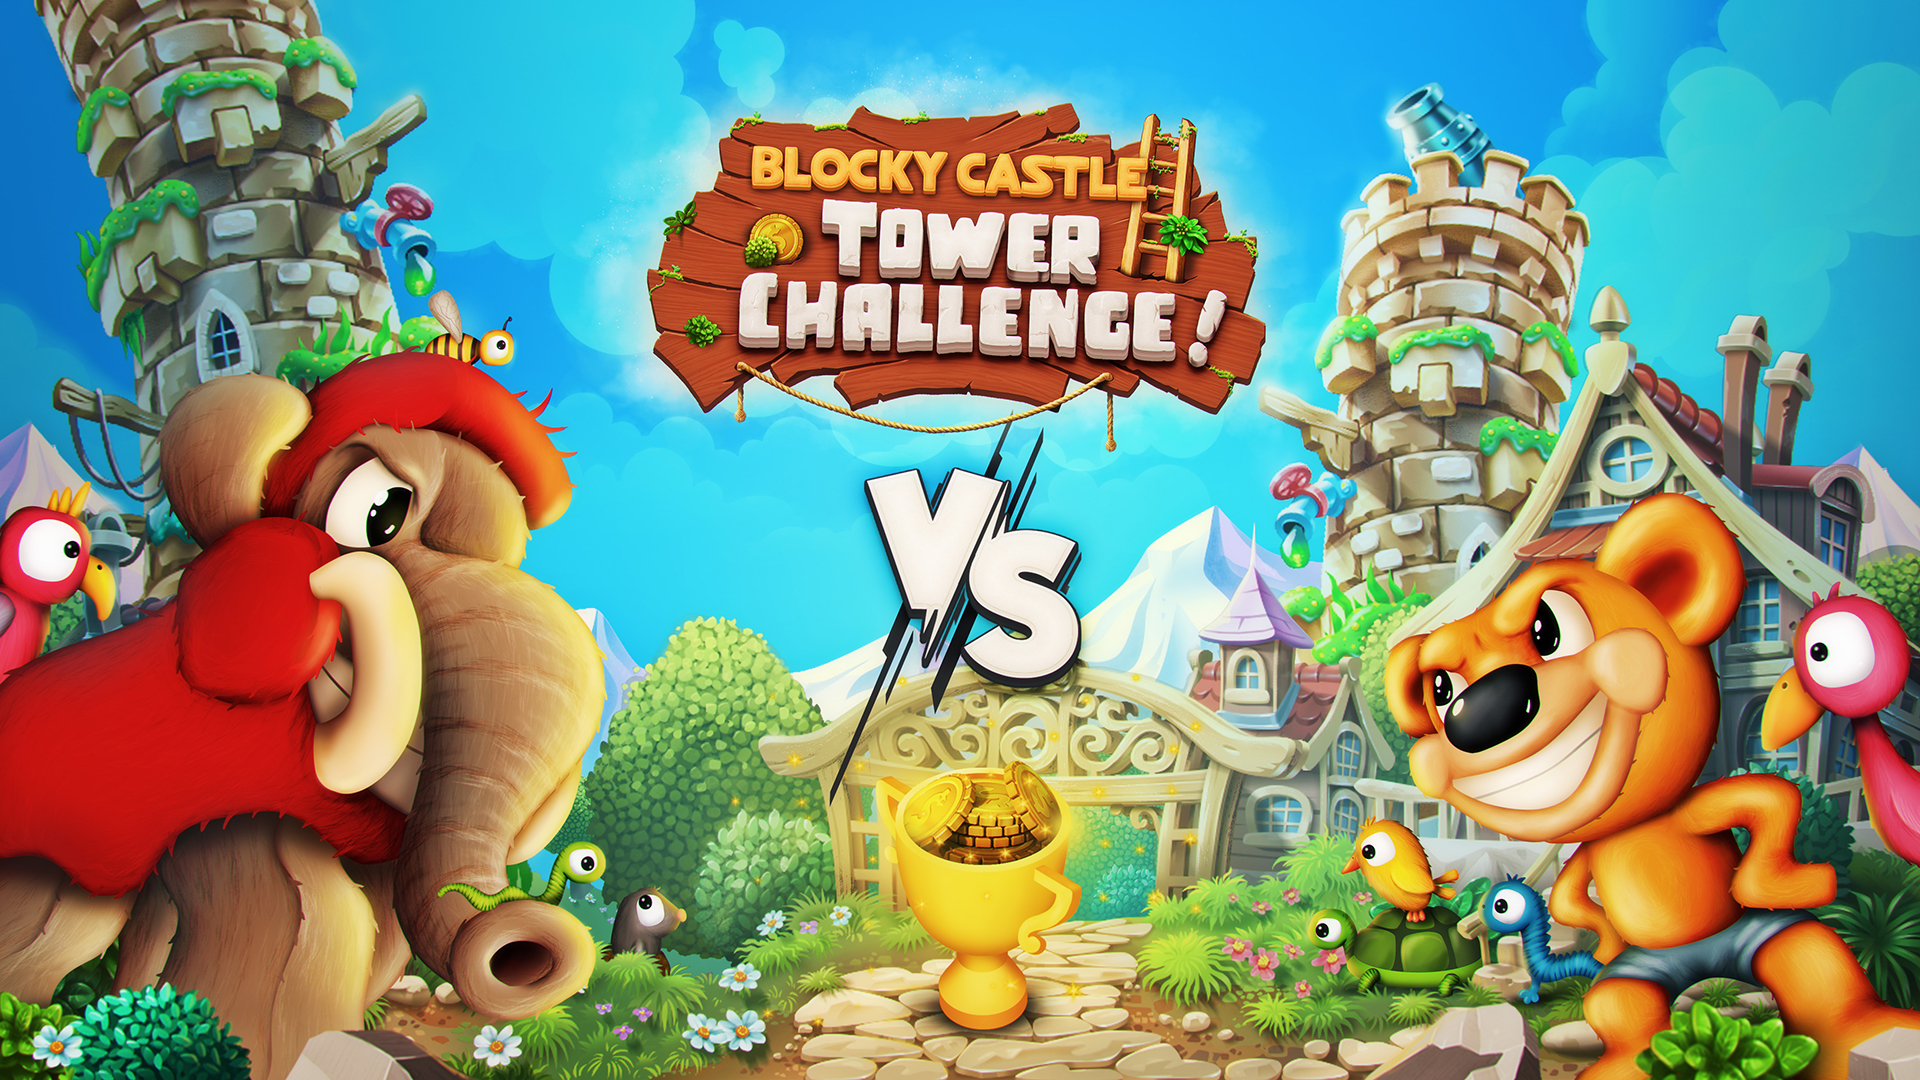 Baixar Blocky Castle: Tower Challenge para Android grátis.